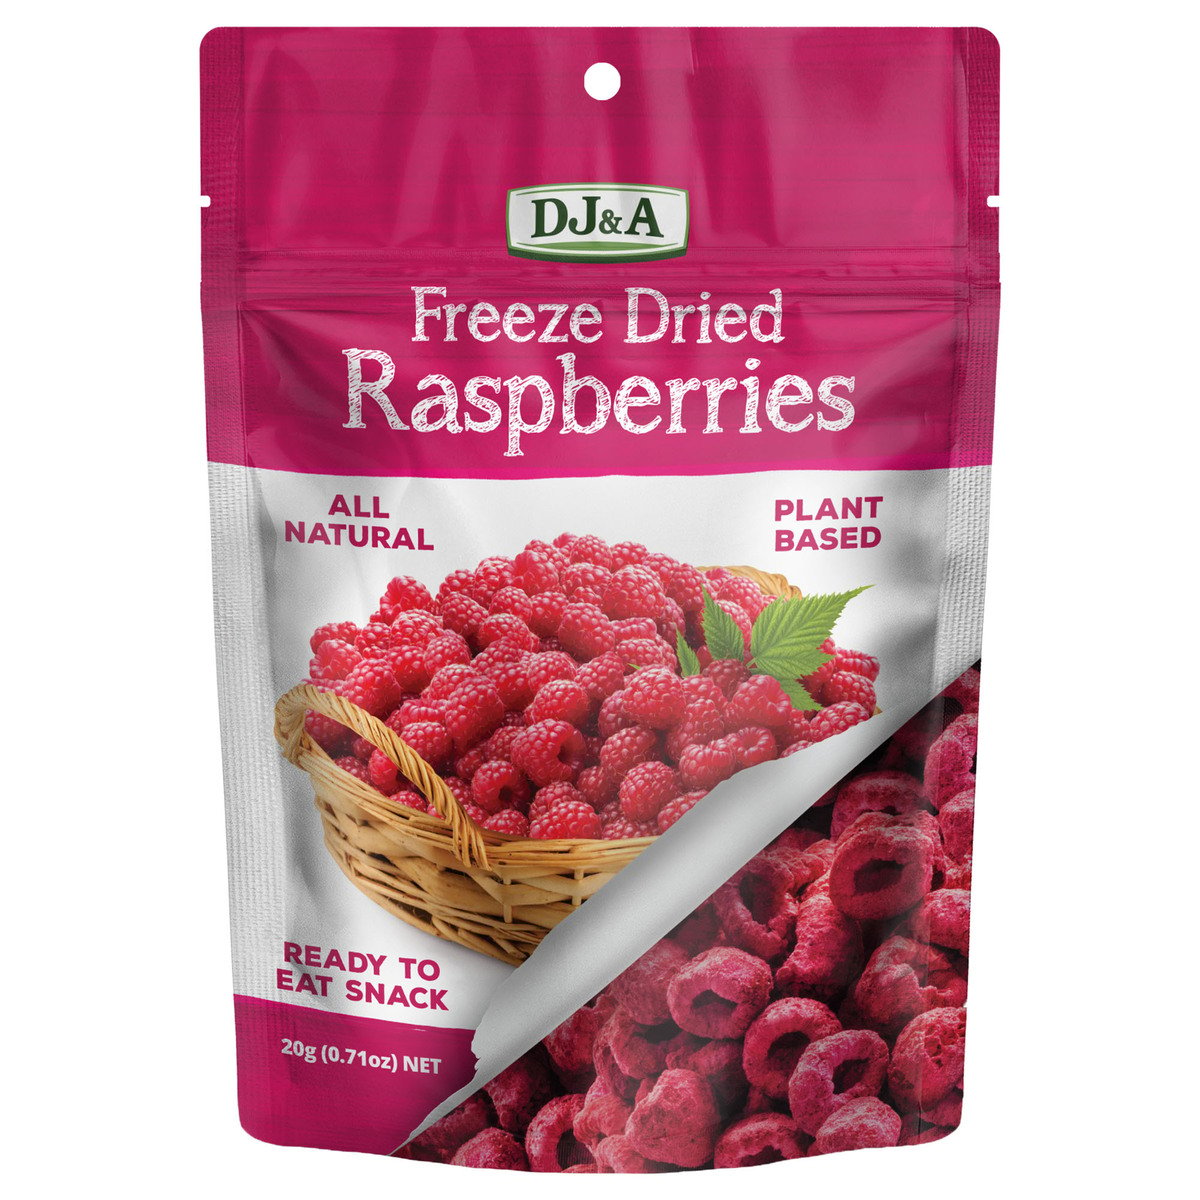 Buy DJ&A Freeze Dried Raspberries 20 g Online at Best Price | Imported for you | Lulu Kuwait in Kuwait